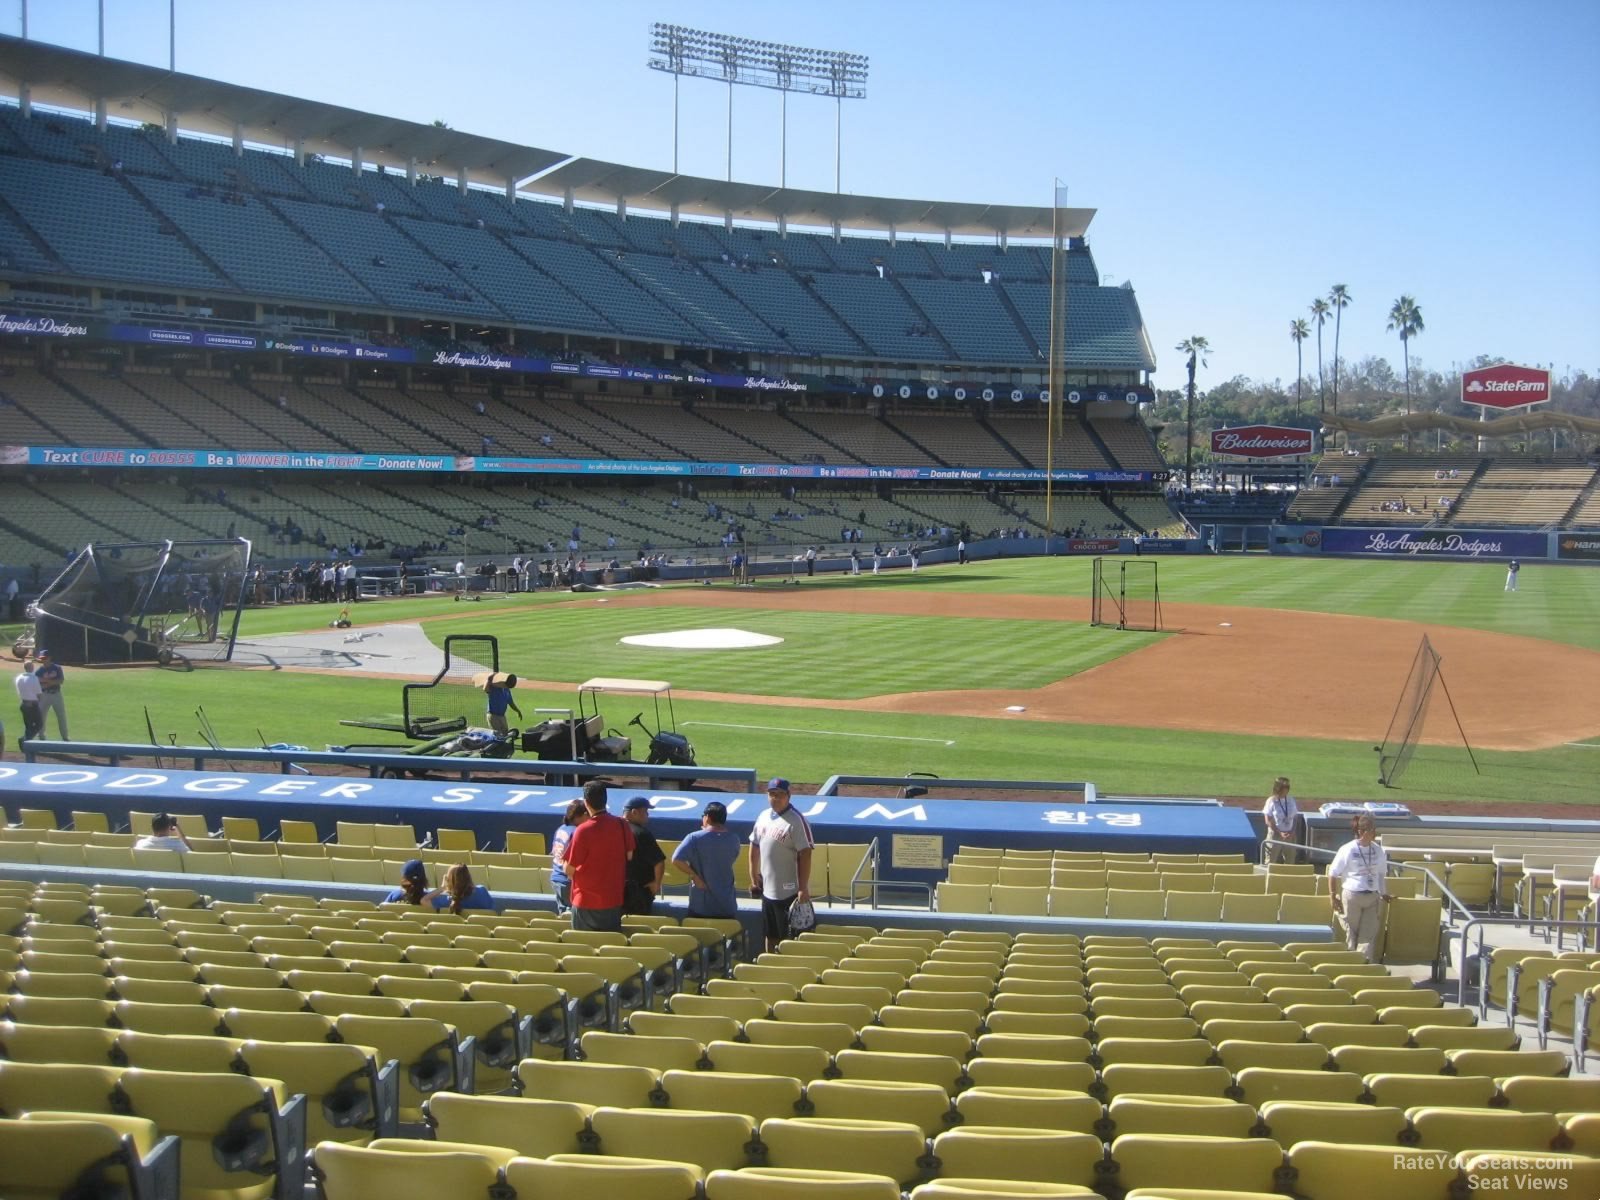 Luggage Storage Dodger Stadium - 24/7 - From $0.95/hour or $5.95/day